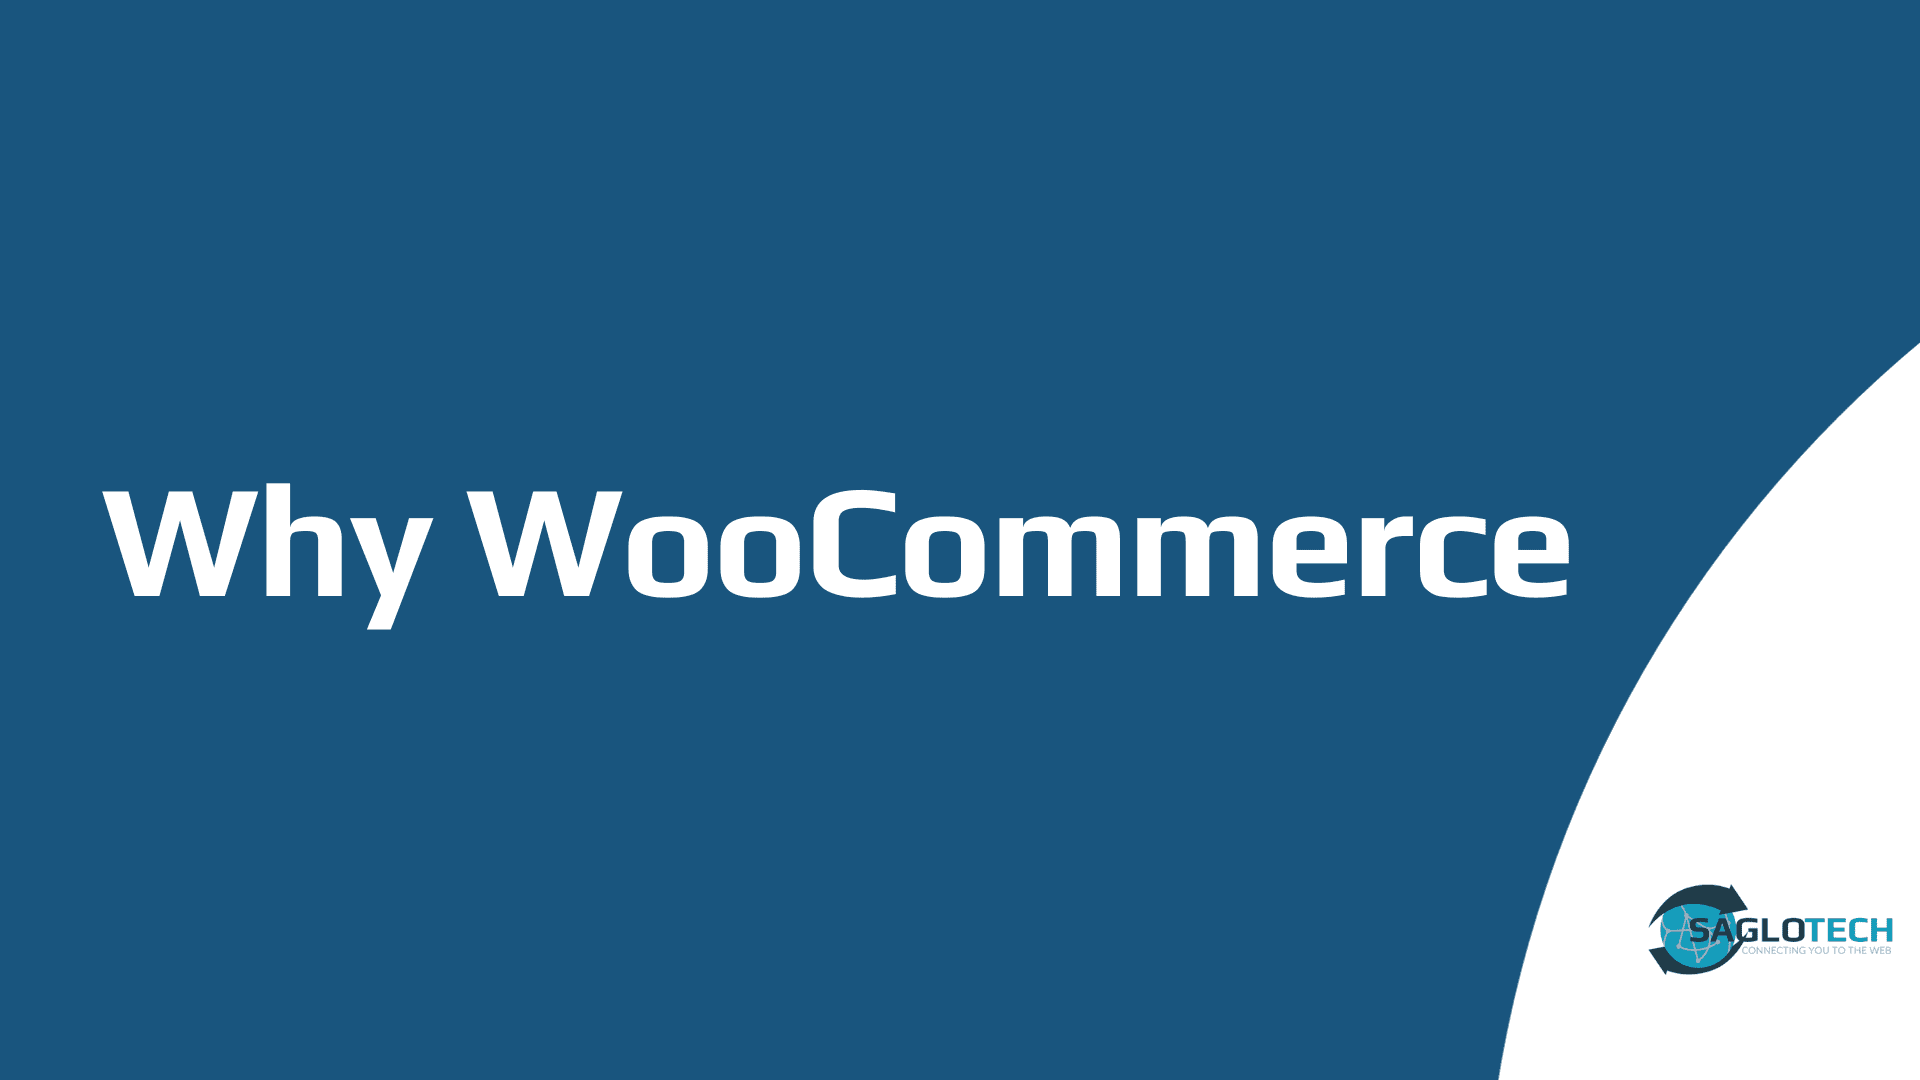 Why Saglotech Prefers WooCommerce for E-commerce Websites